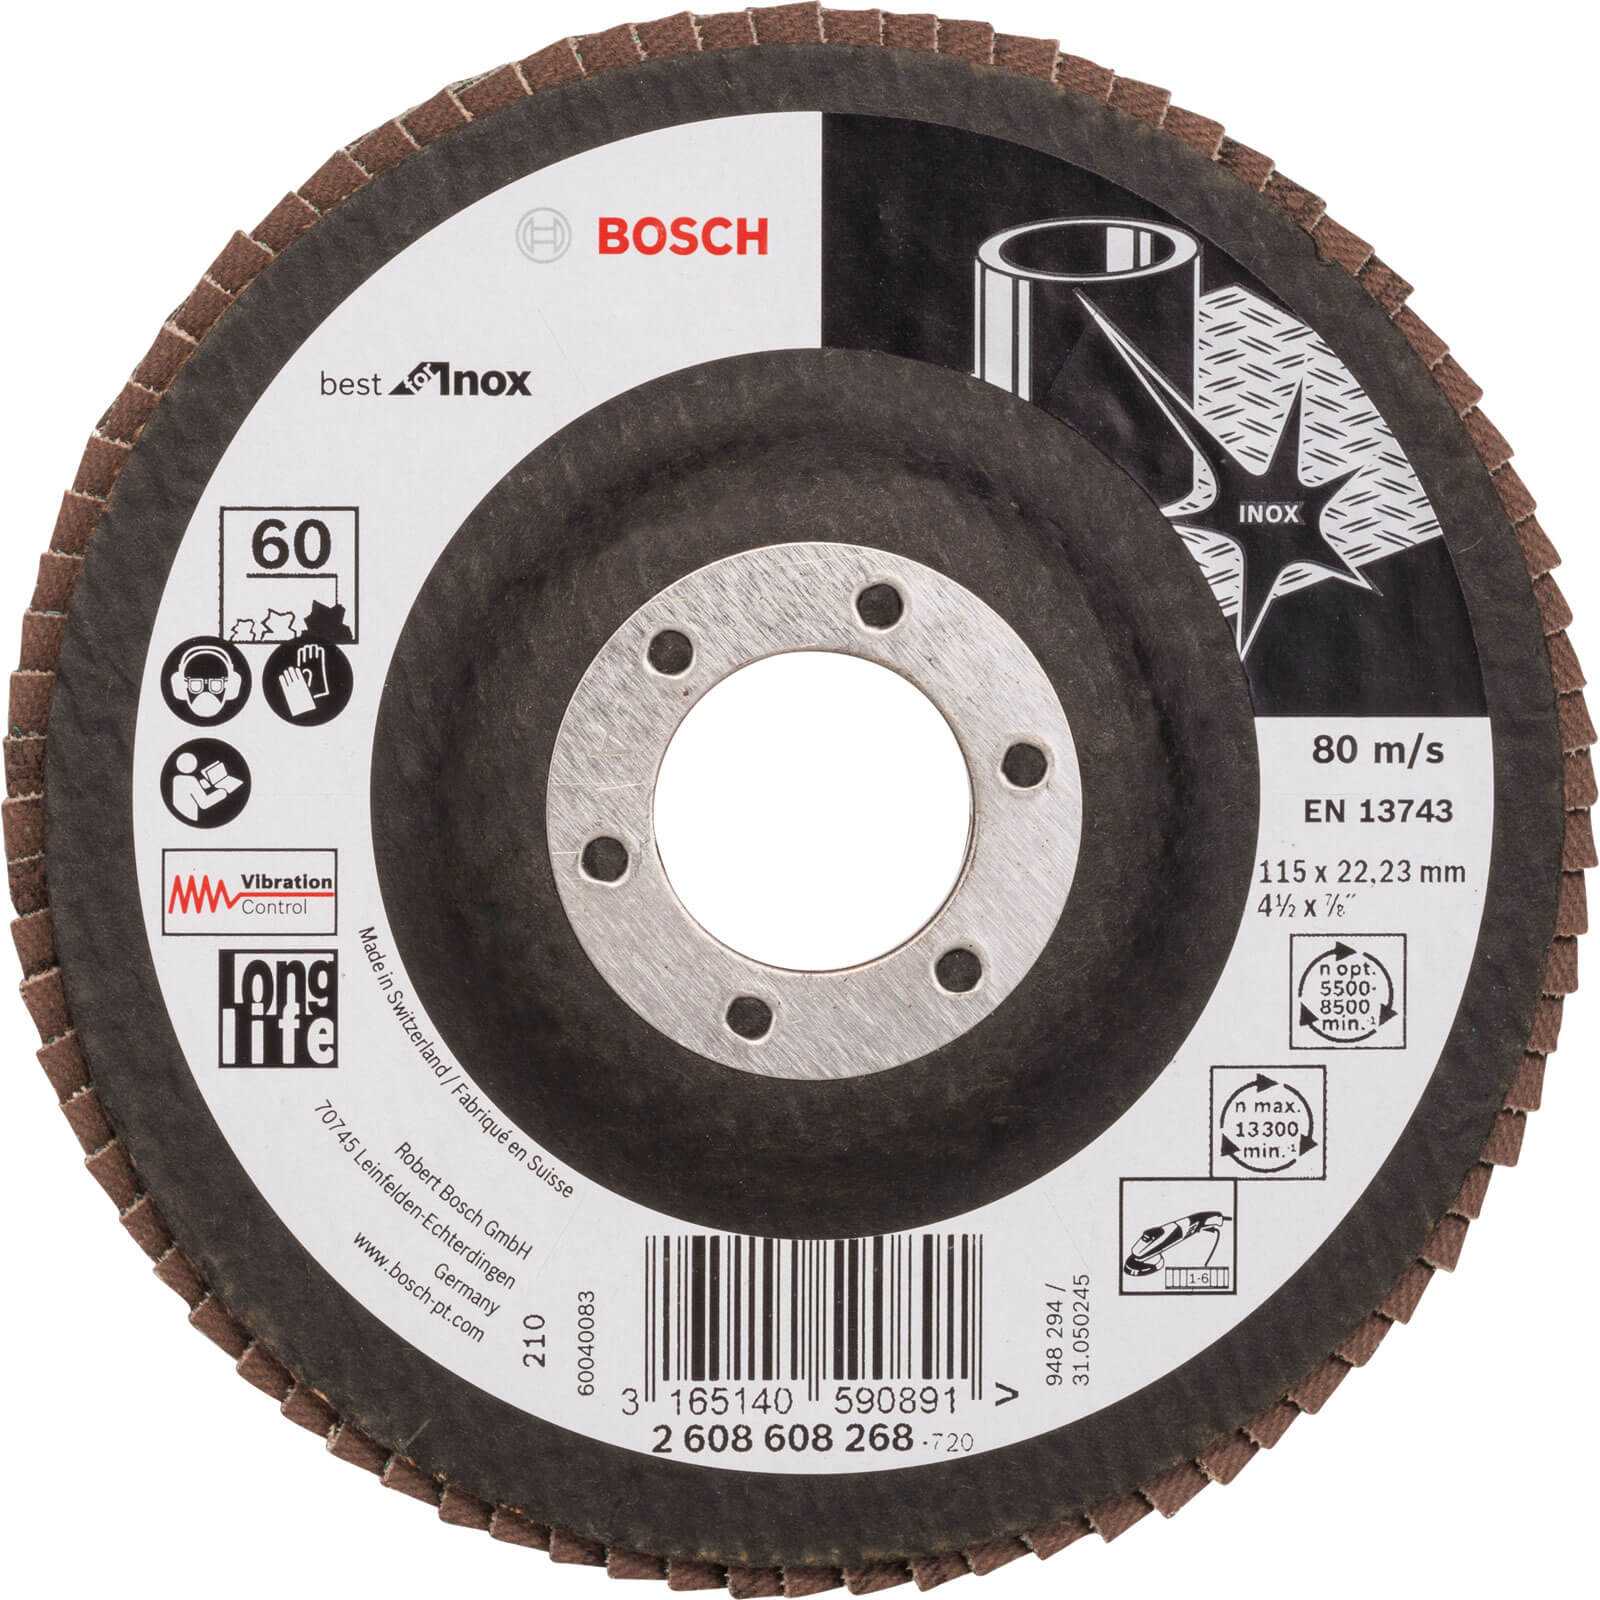 Image of Bosch X581 Best for Inox Straight Flap Disc 115mm 60g Pack of 1